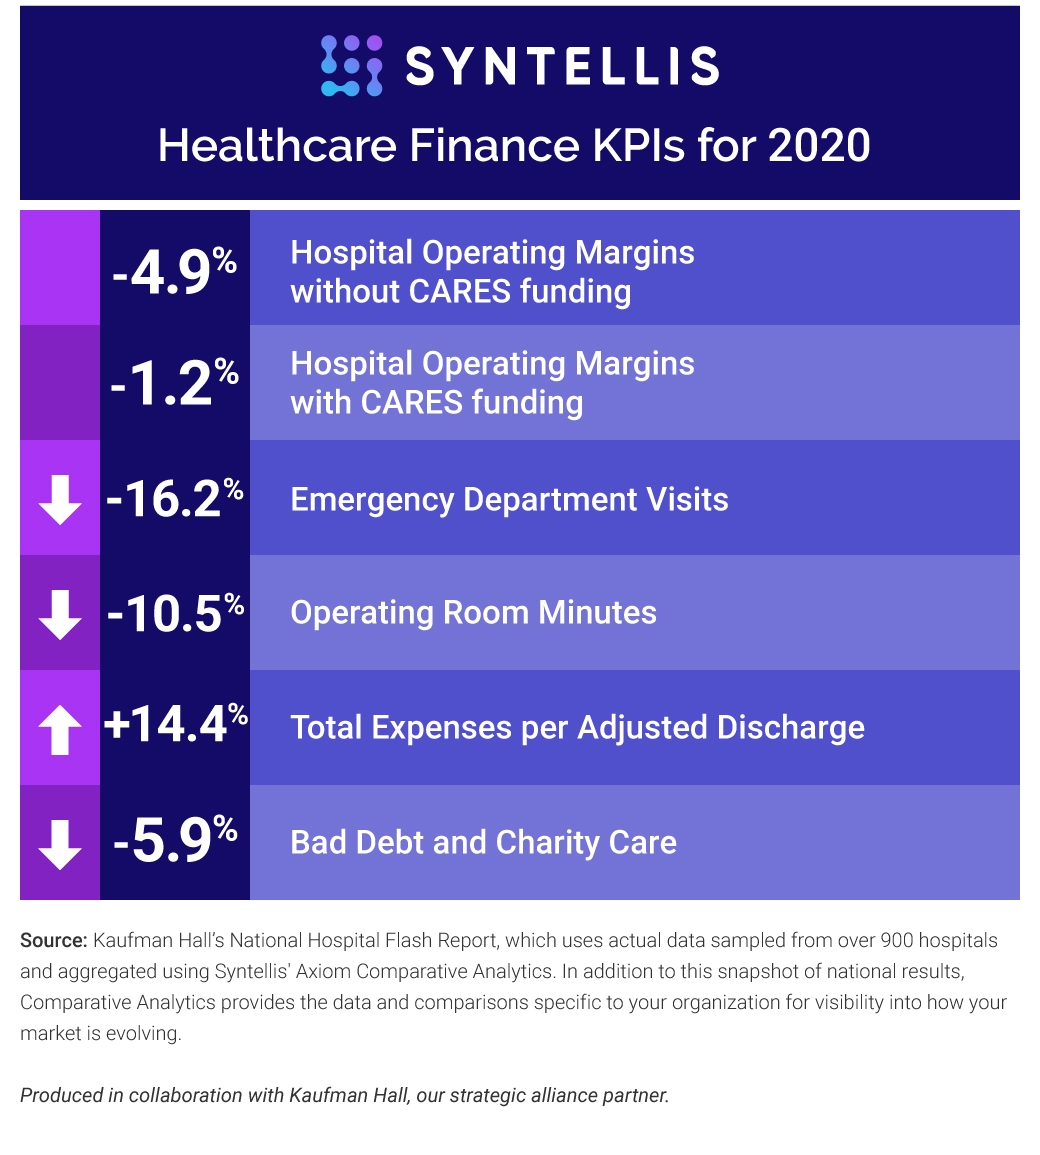 Top 5 Healthcare Finance KPIs for 2020